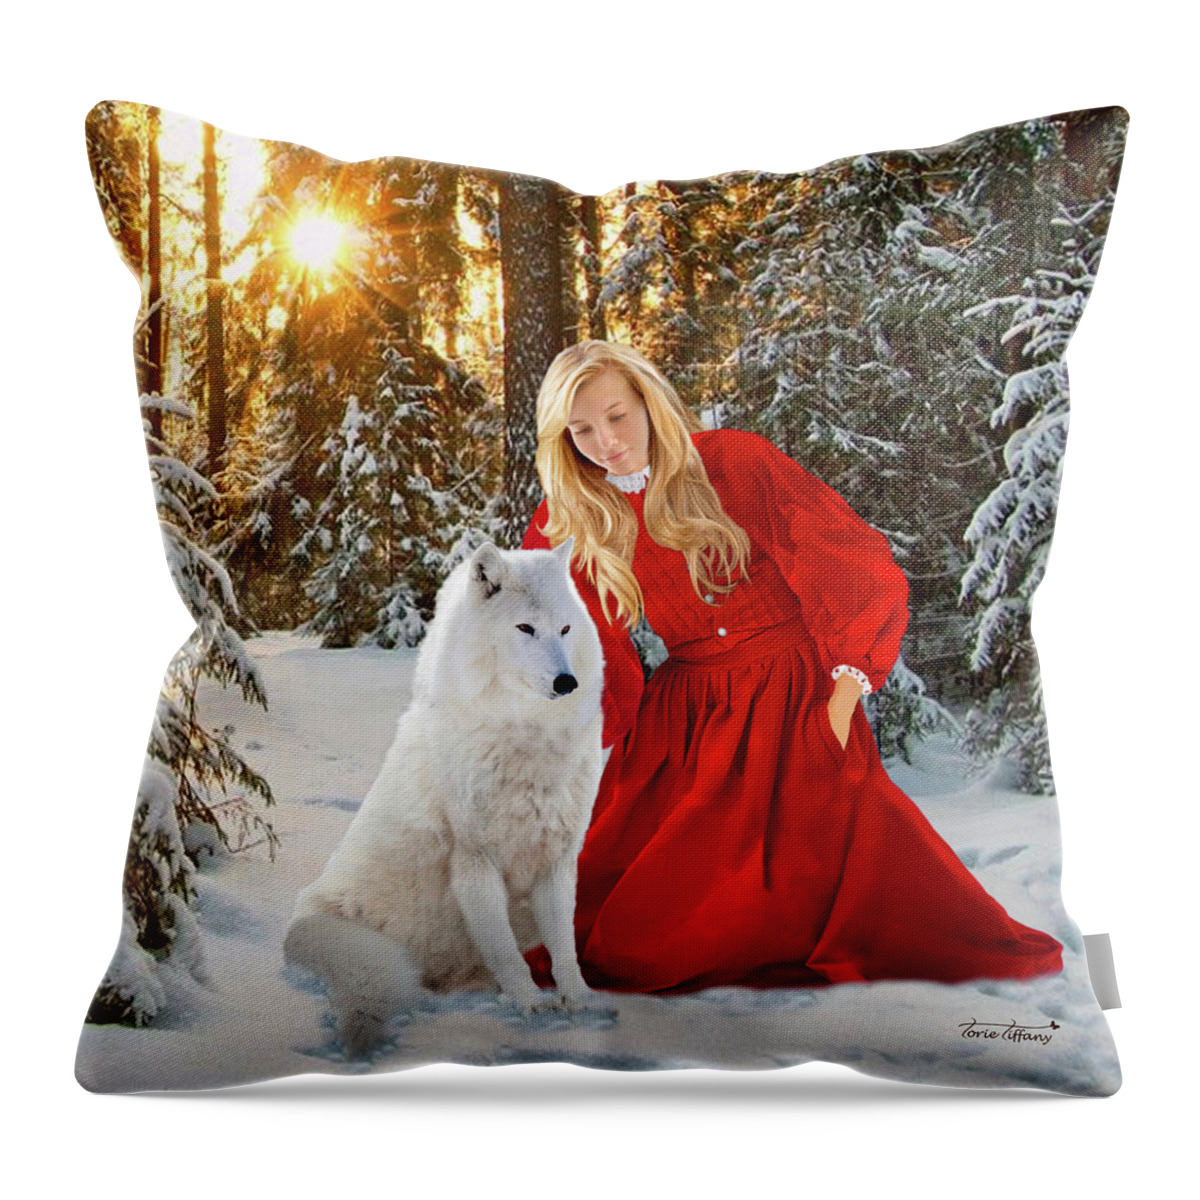 Fine Art Throw Pillow featuring the digital art Winter Solstice by Torie Tiffany